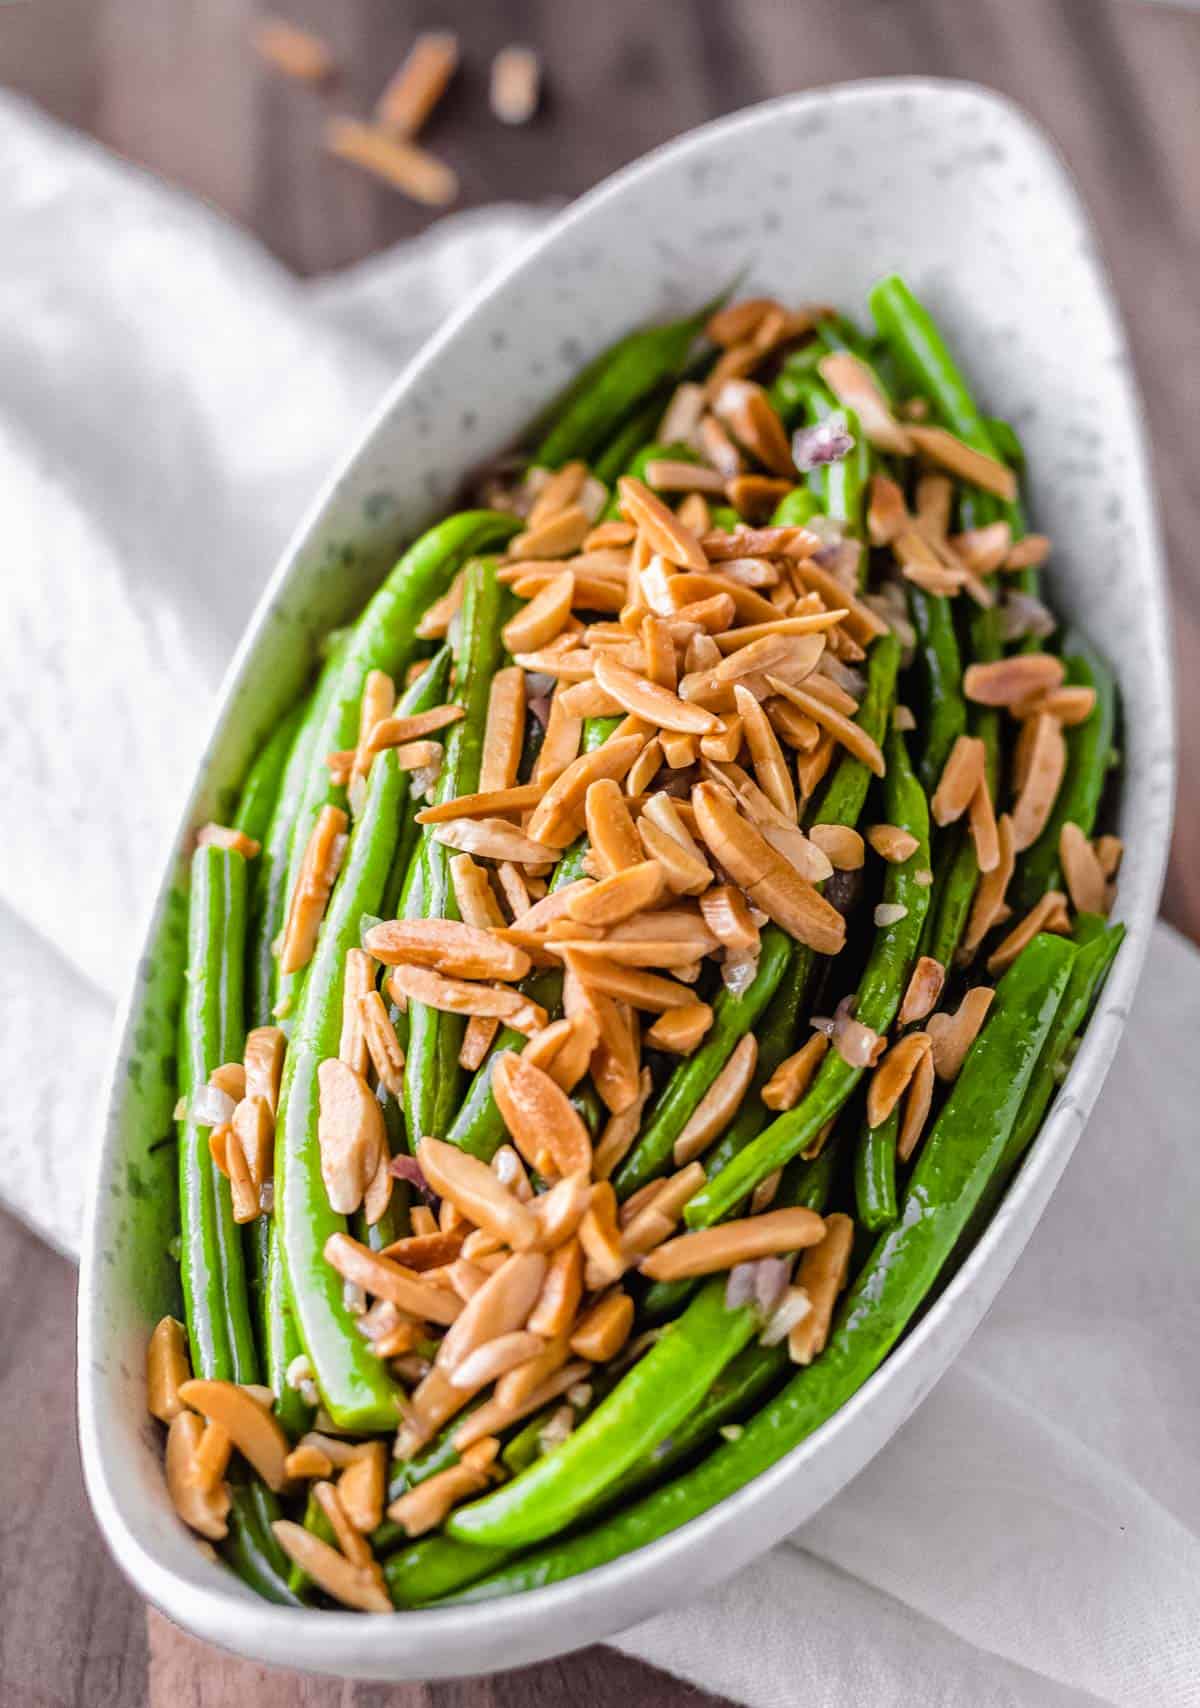 An oblong bowl filled with green beans and almonds over a white towel and wood board